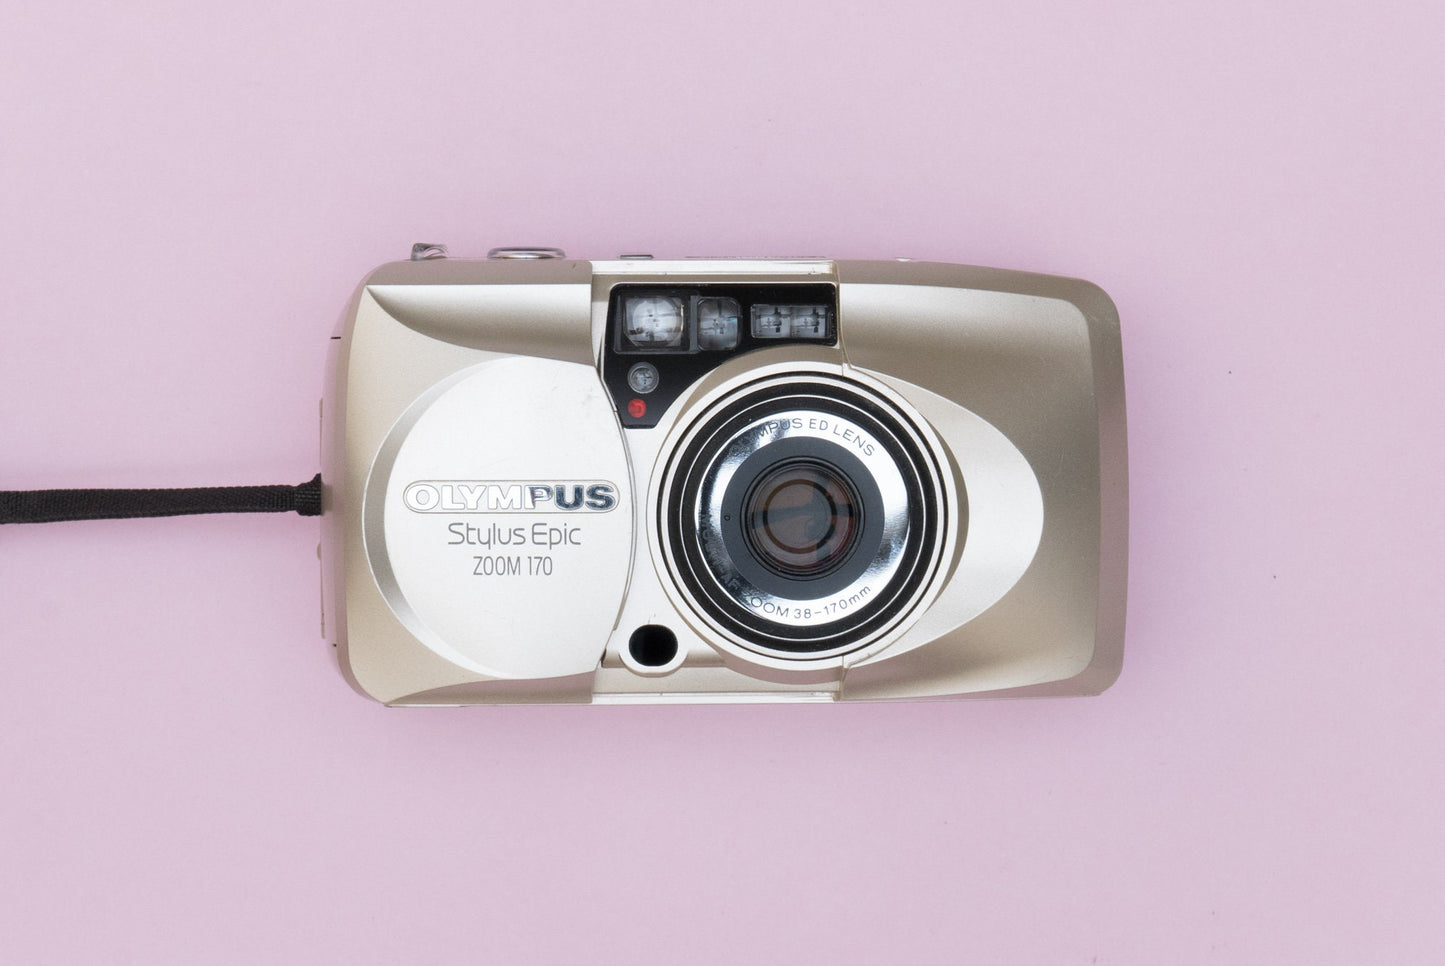 Olympus µ[mju:] Mju Zoom 170 Stylus Epic Compact 35mm Point and Shoot Film Camera